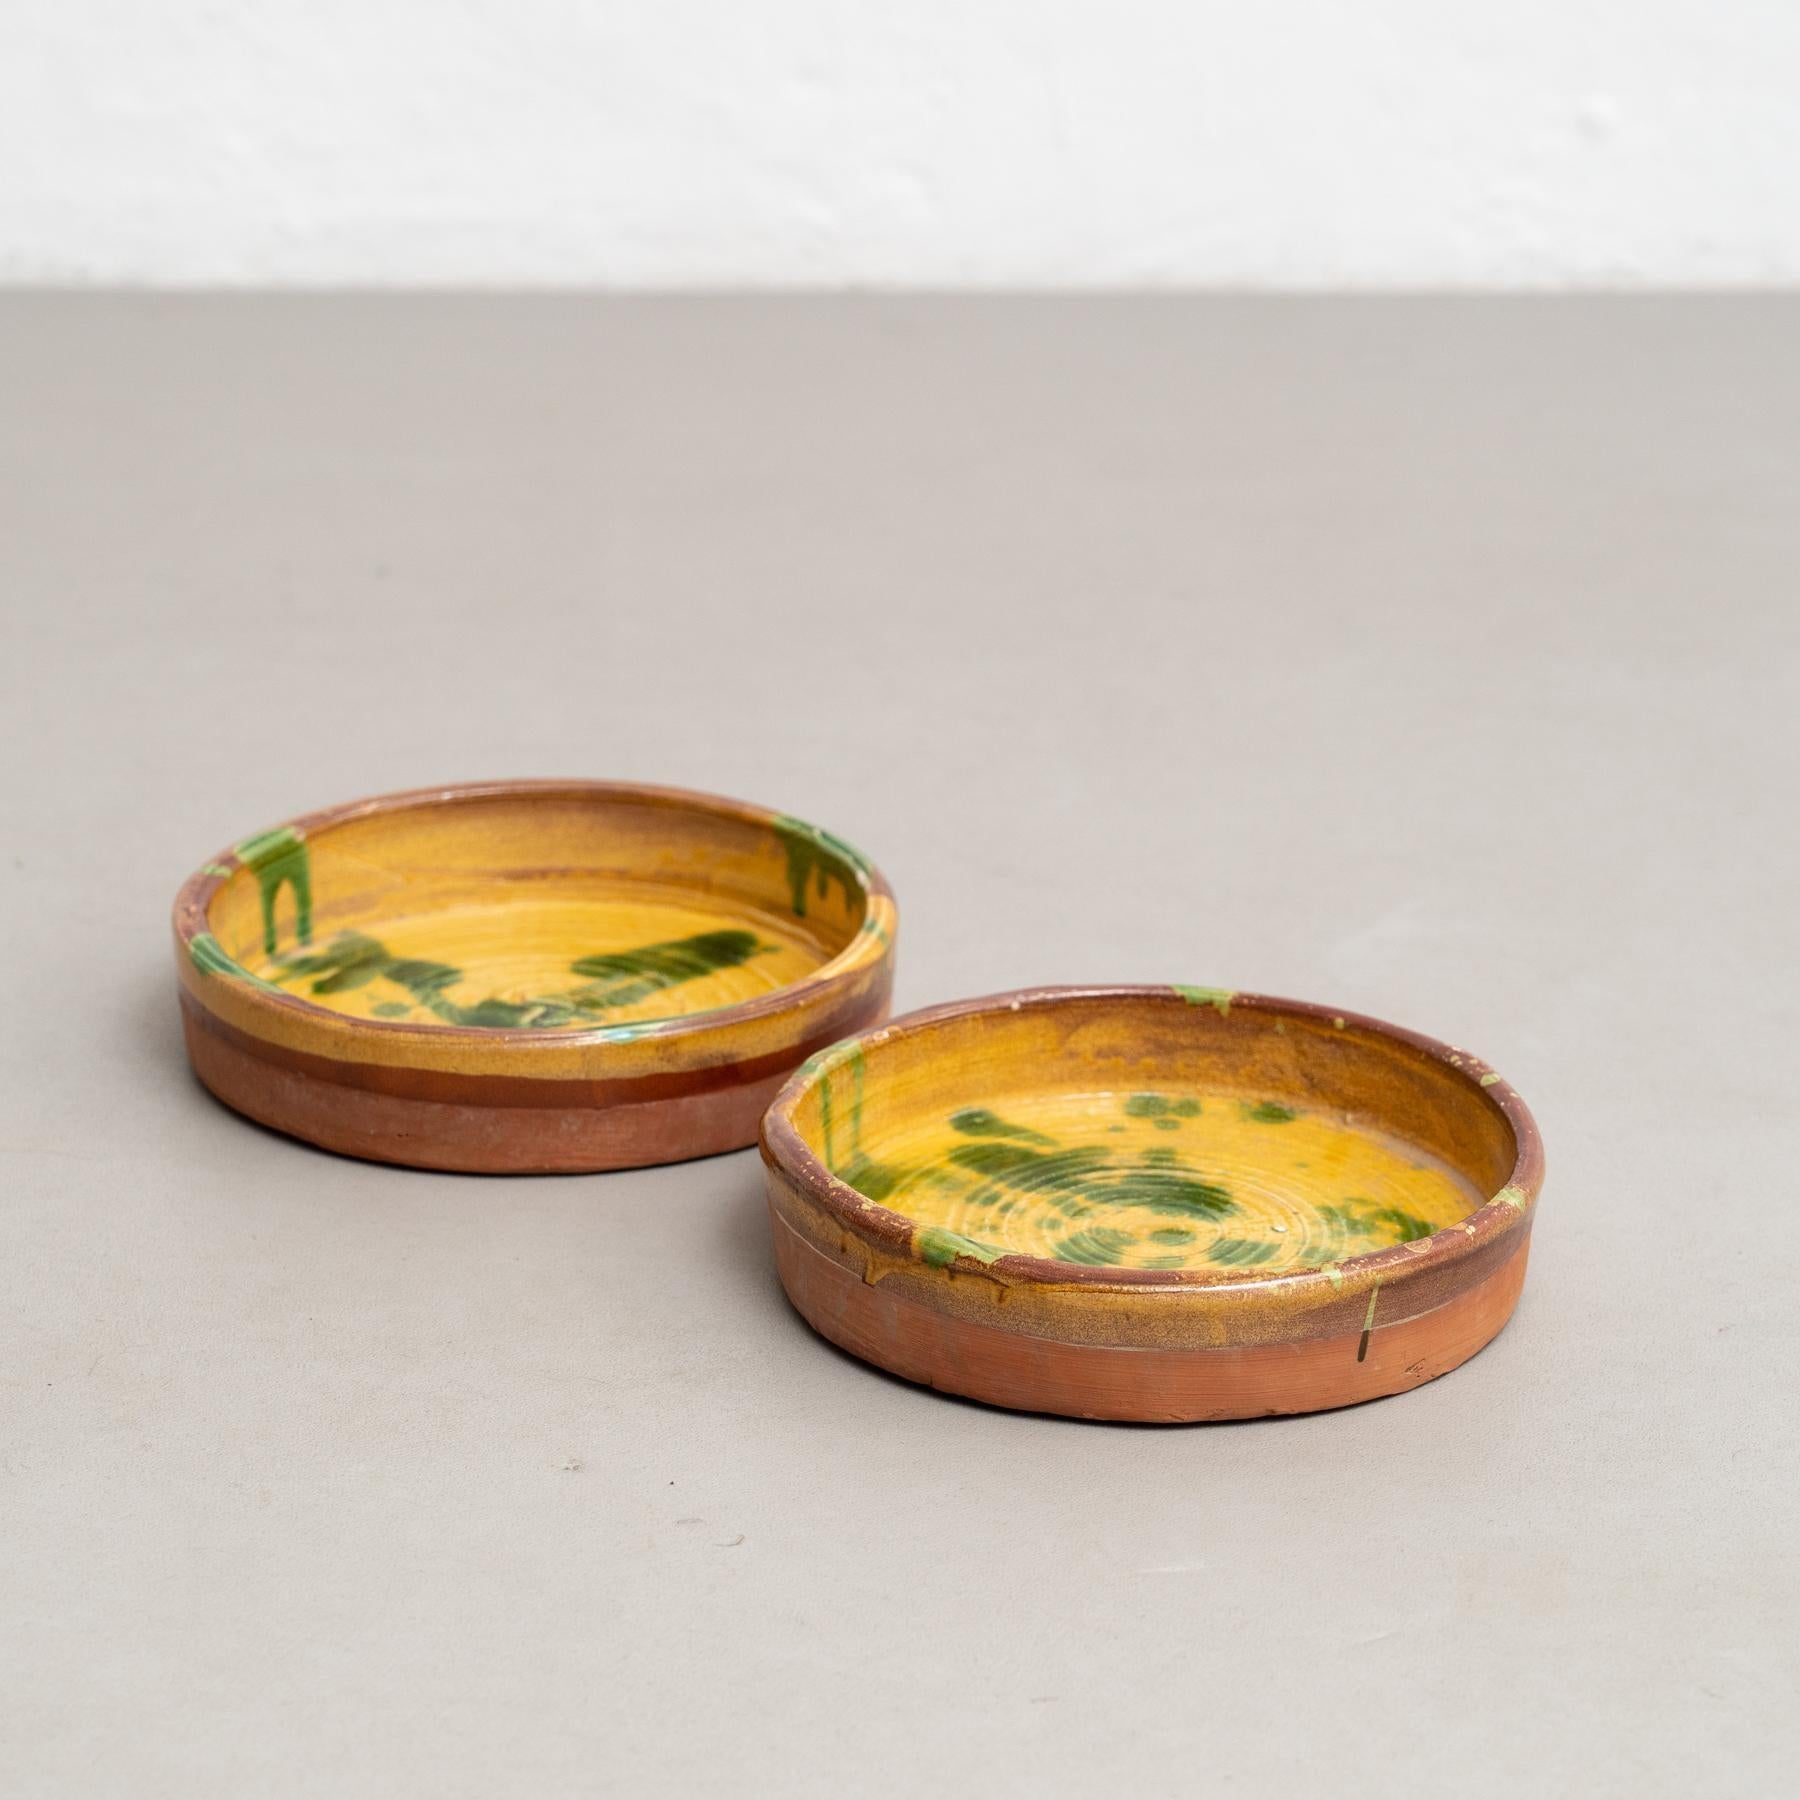 Set of two Early 20th century hand painted rustic popular traditional ceramic.
By unknown artisan, France.
In original condition, with minor wear consistent with age and use, preserving a beautiful patina.

Materials:
Ceramic

Important information